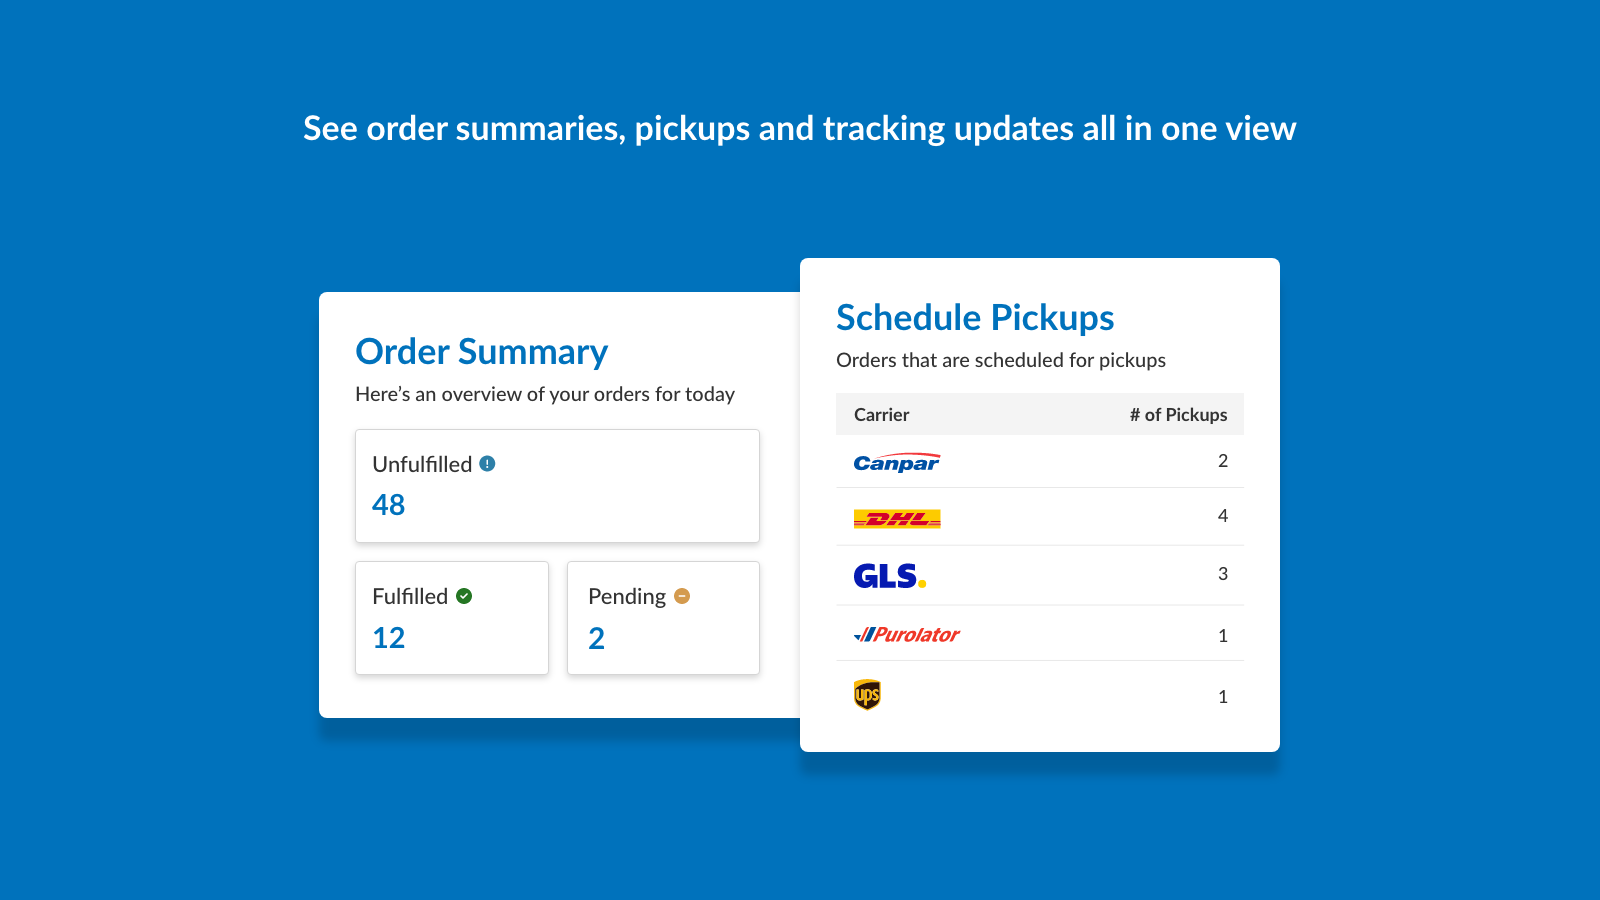 See order summaries, pickups and tracking updates